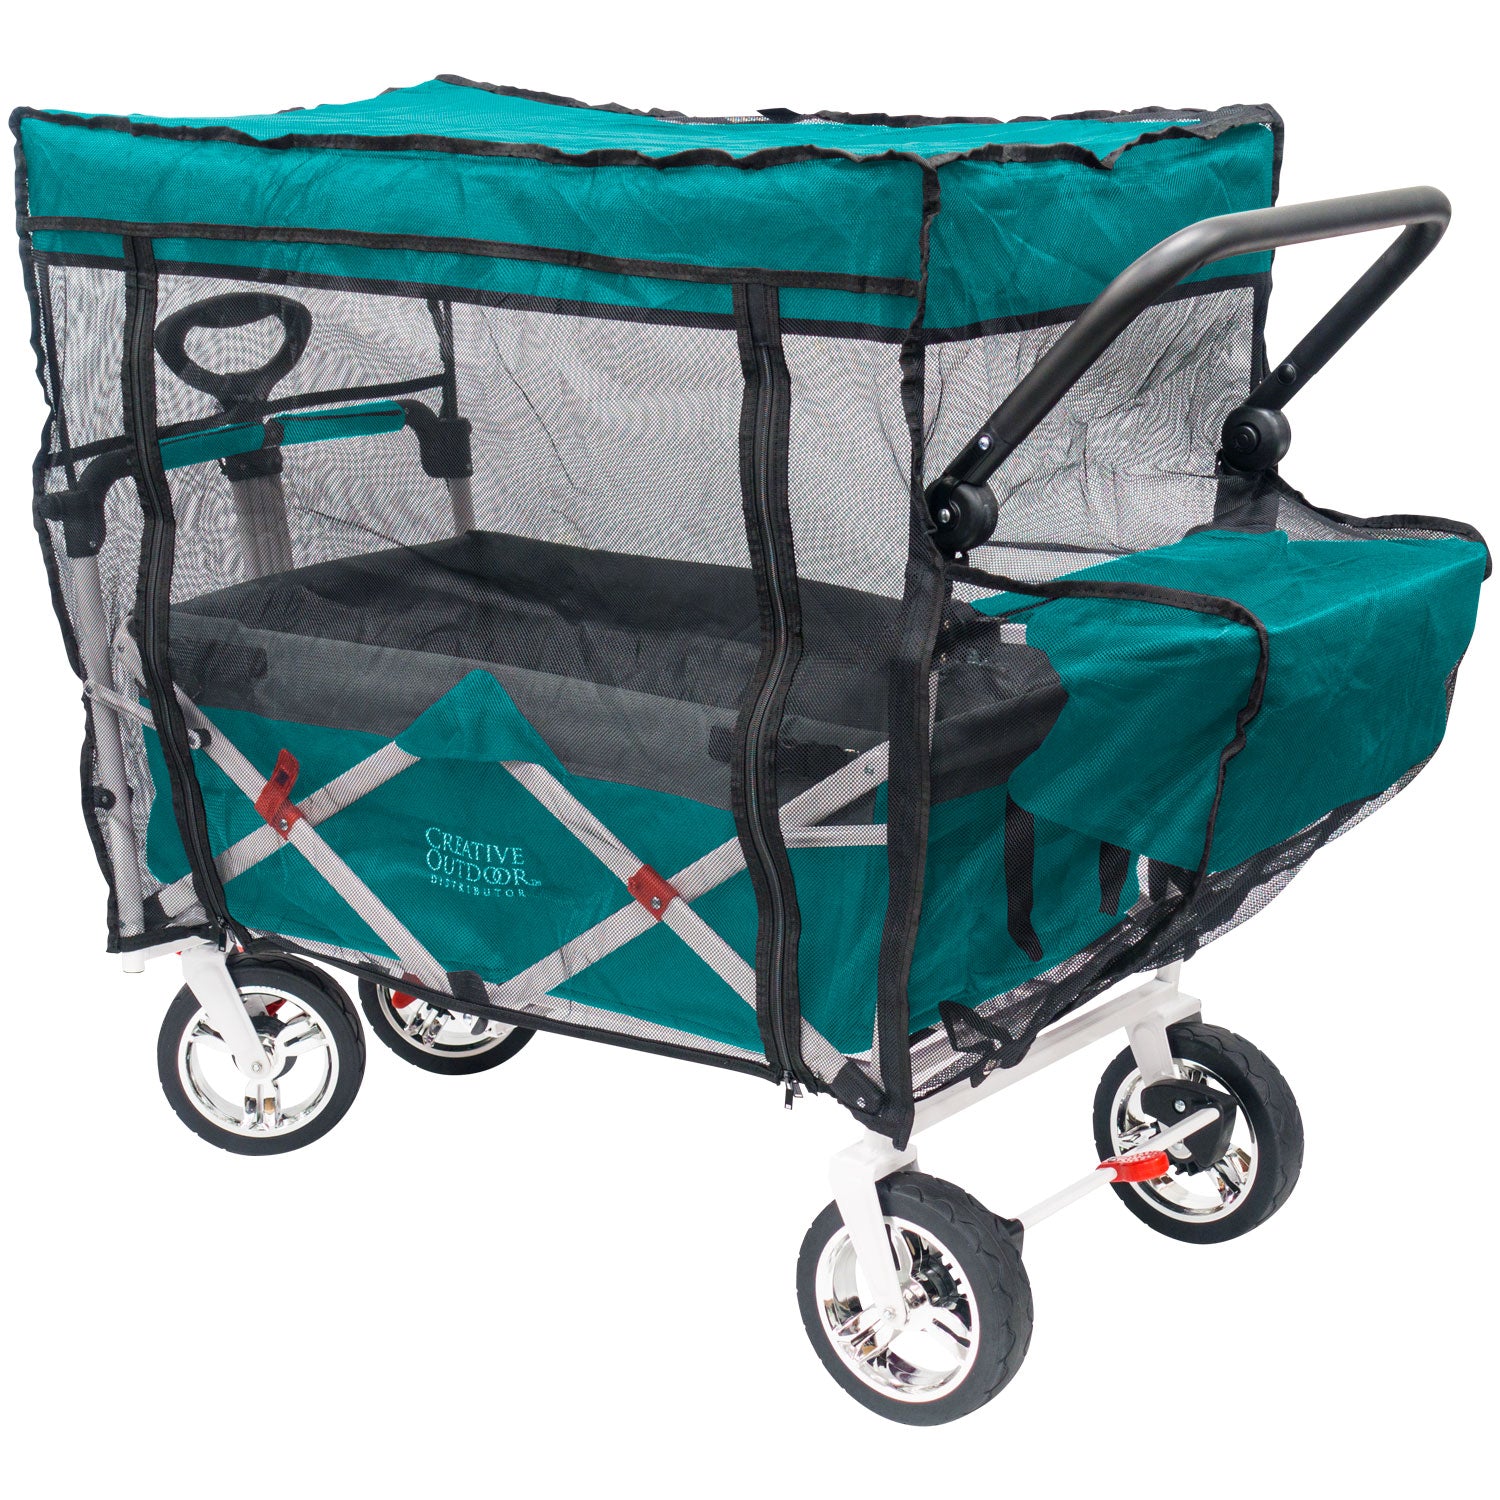 push-pull-folding-wagon-insect-mosquito-bug-net-accessory